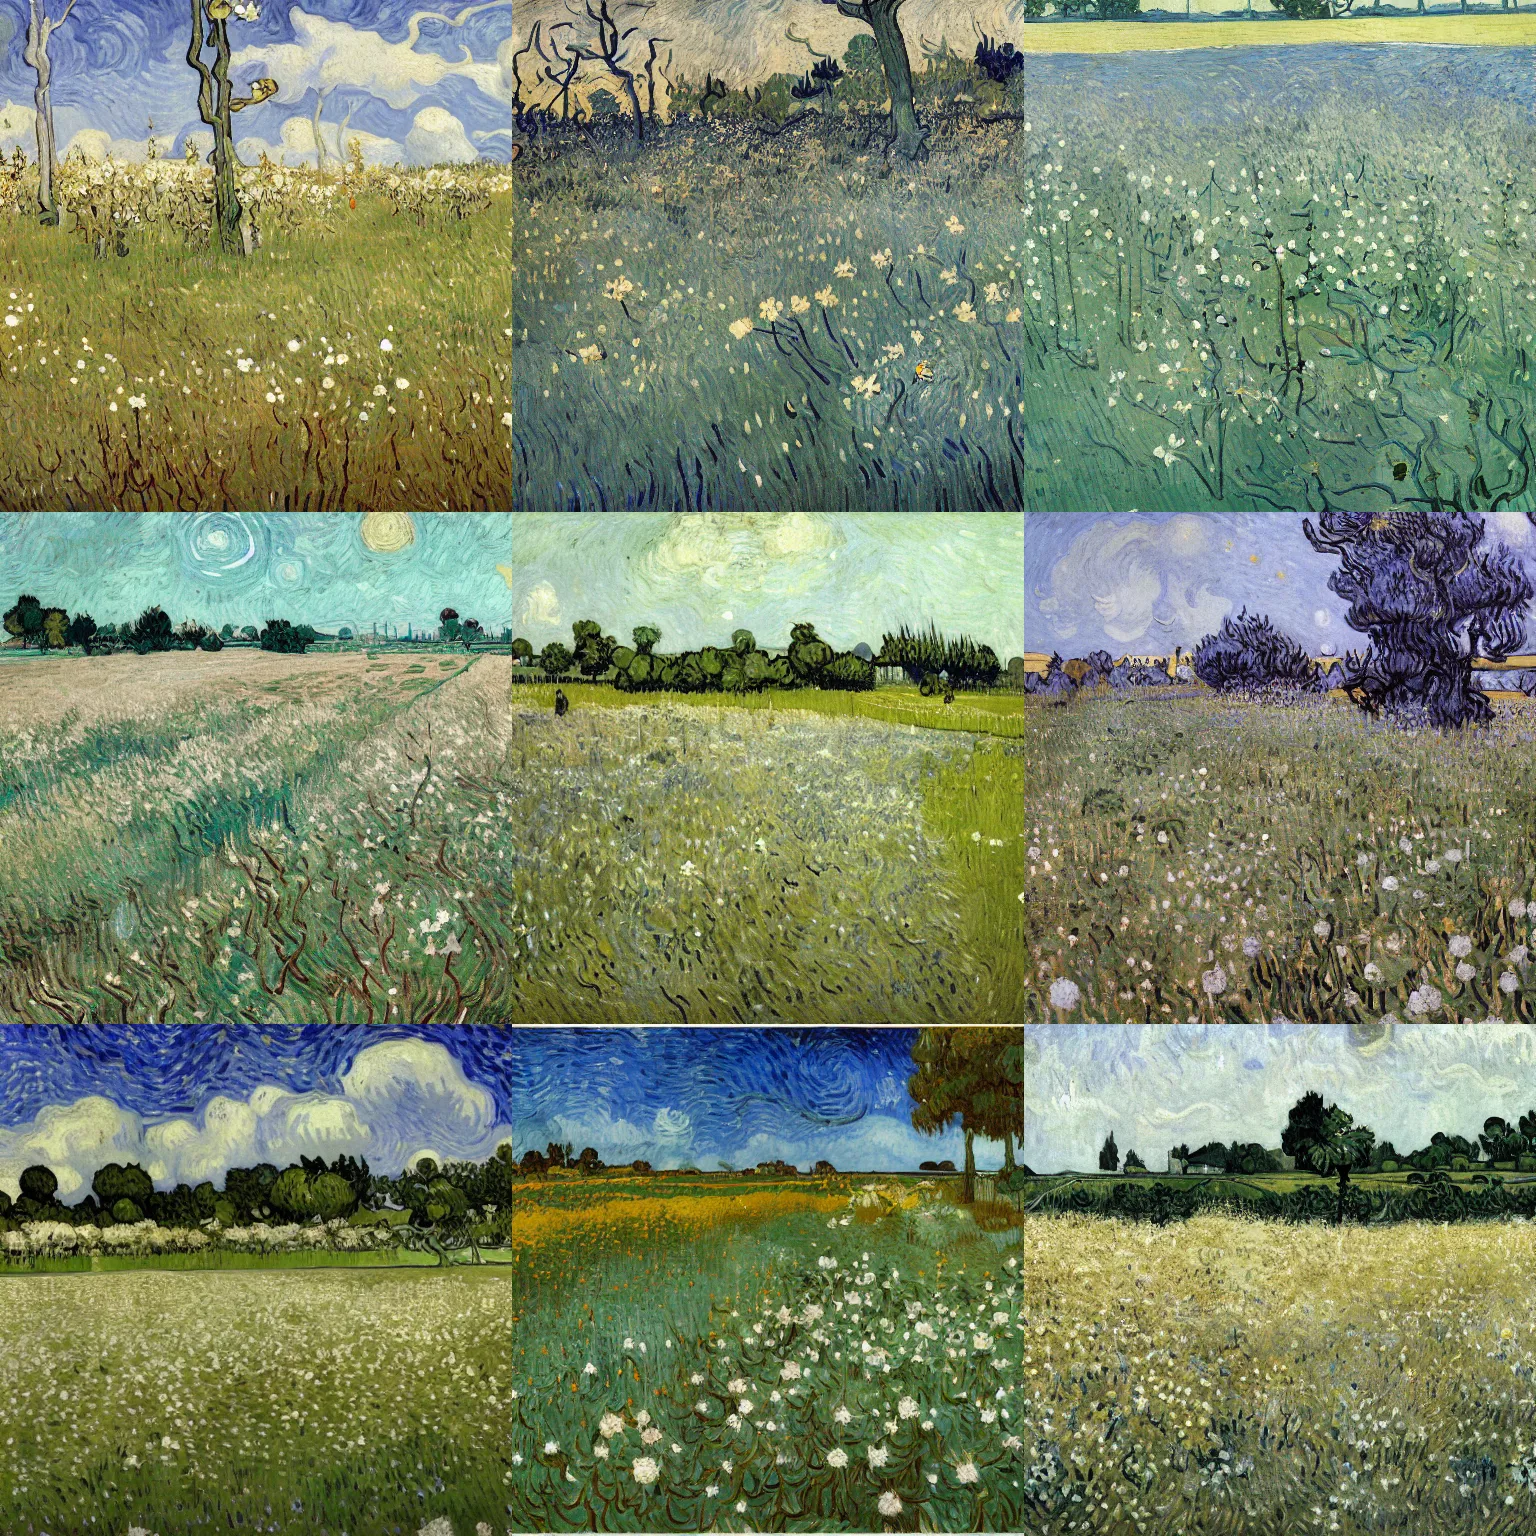 Prompt: white oleander clumped in fields with trees covered by rough bark, evening shadows drew dark faces as white willows shivered fiercely and gardens of flowers unpicked entwined thin arms to seek earth, magical realism, impressionist gouache painting by Van Gogh, WLOP, and Wes Anderson, featured on Artstation, Pinterest, concept art